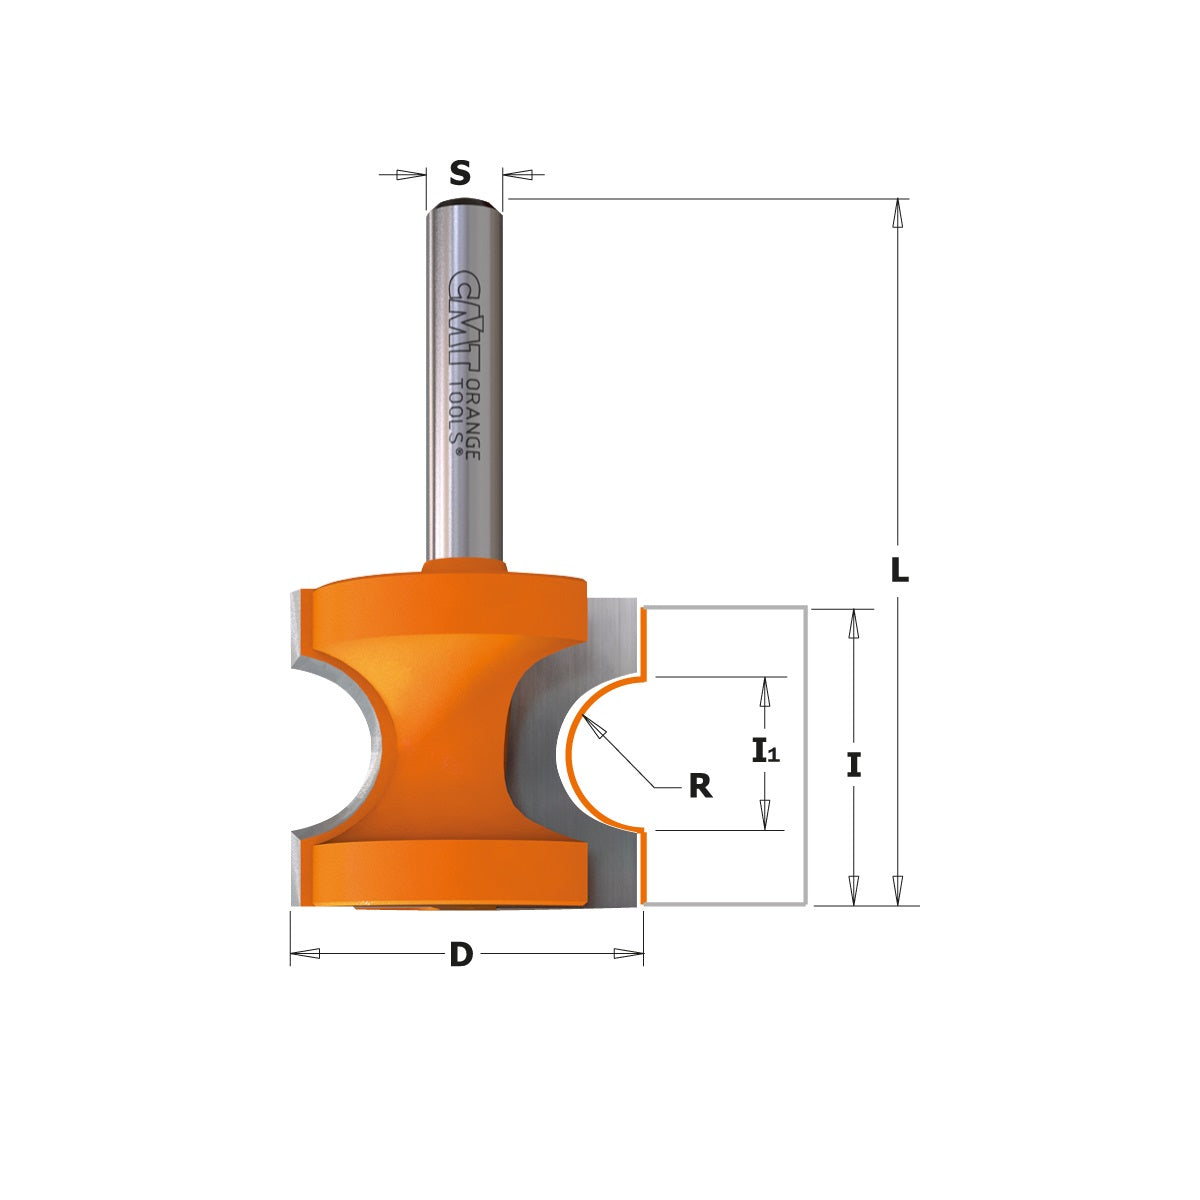 Half-round cutter with two cutting edges, radius 3.2 mm - CMT 754.002.11